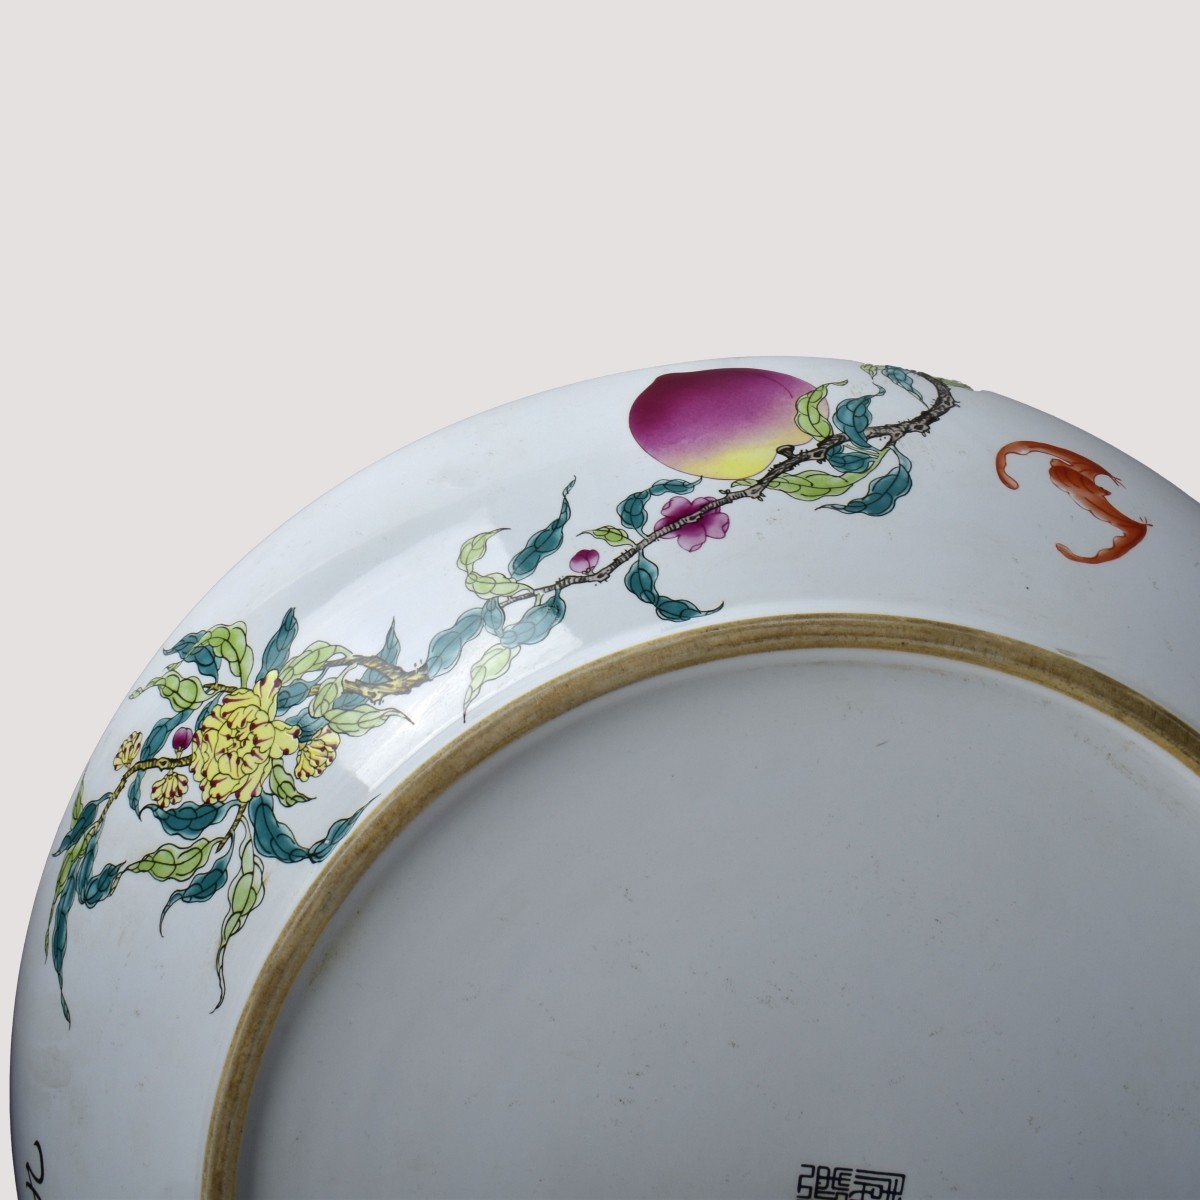 Large Chinese Porcelain Charger